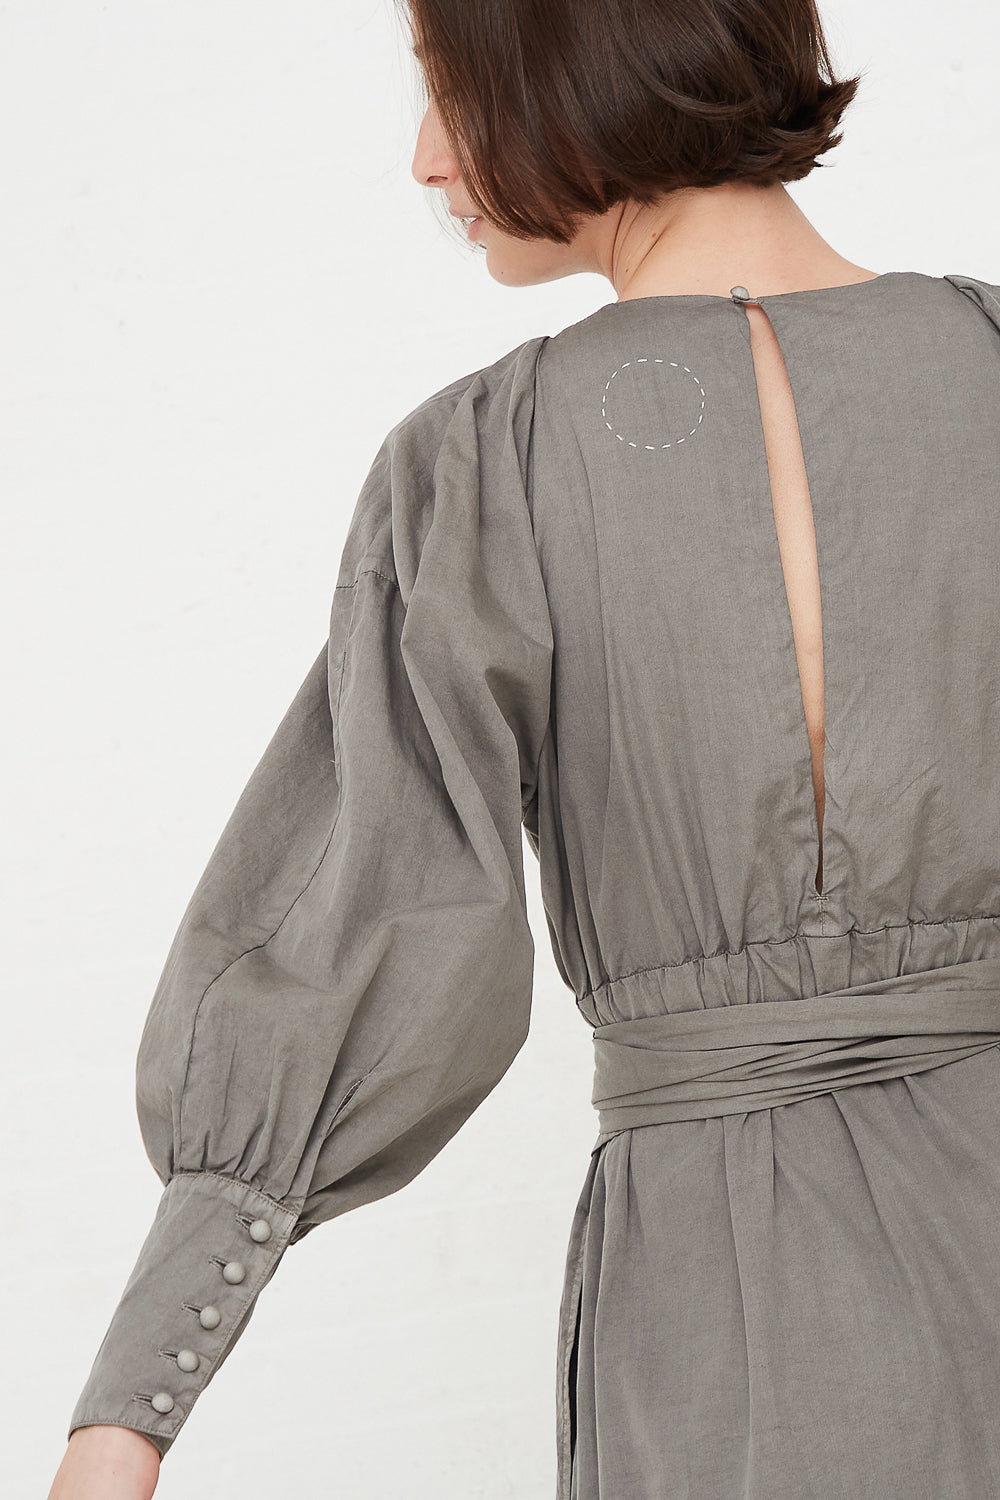 Cosmic Wonder - Suvin Cotton Broadcloth Wrapped Dress in Sumi back sleeve detail